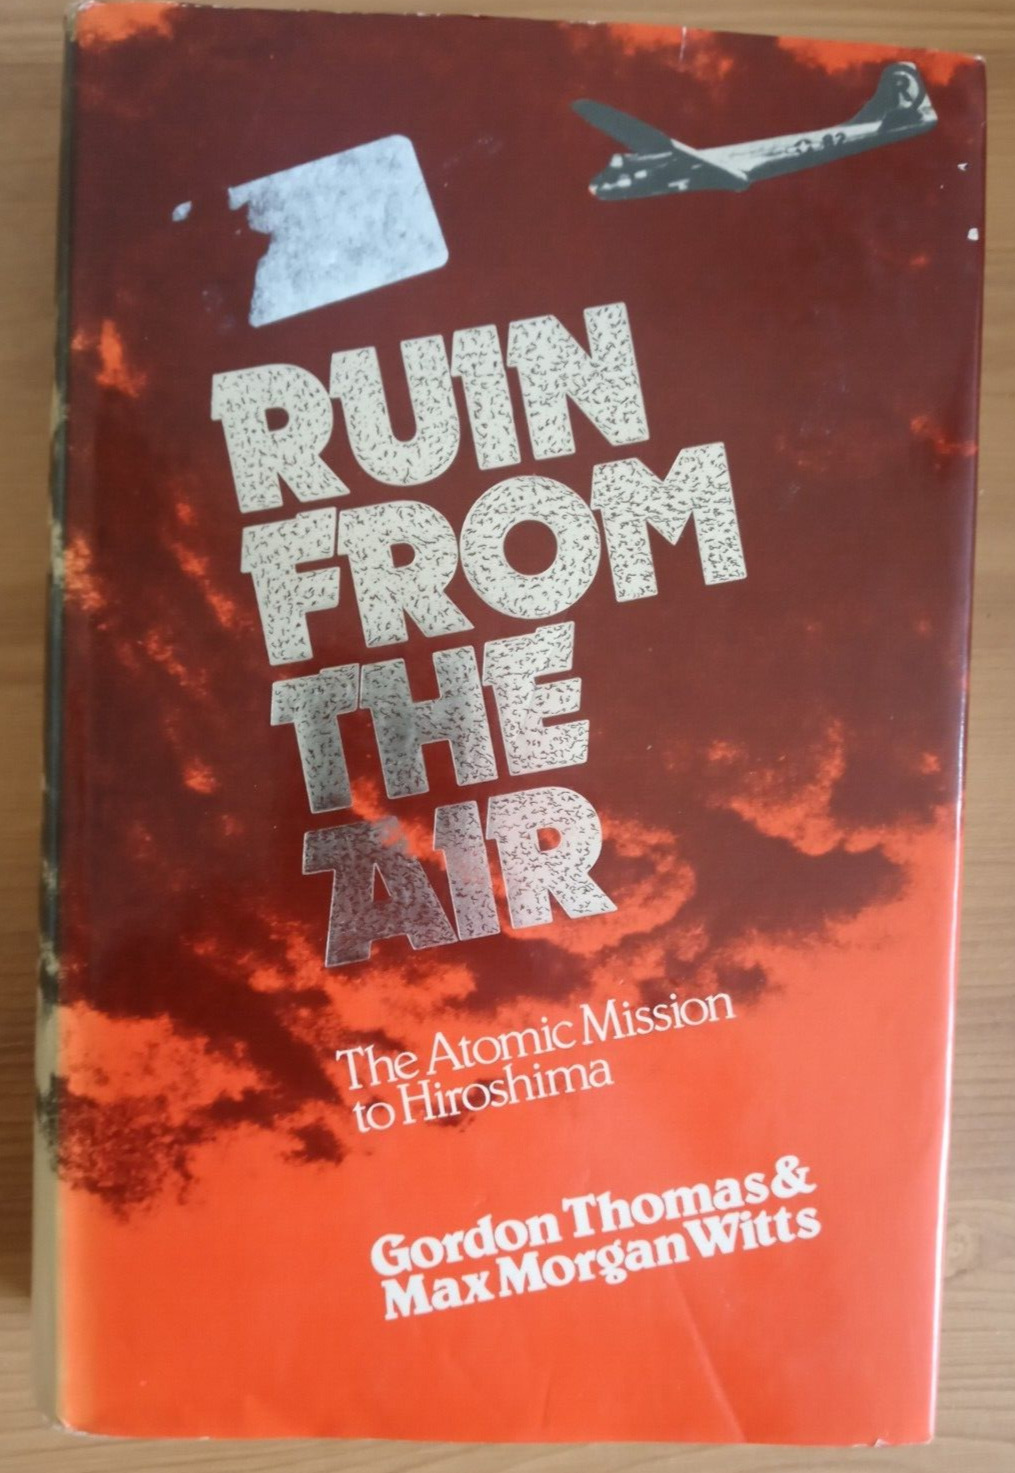 VINTAGE 1978 WW11 MILITARY BOOK RUIN FROM THE AIR THE ATOMIC MISSION Hiroshima